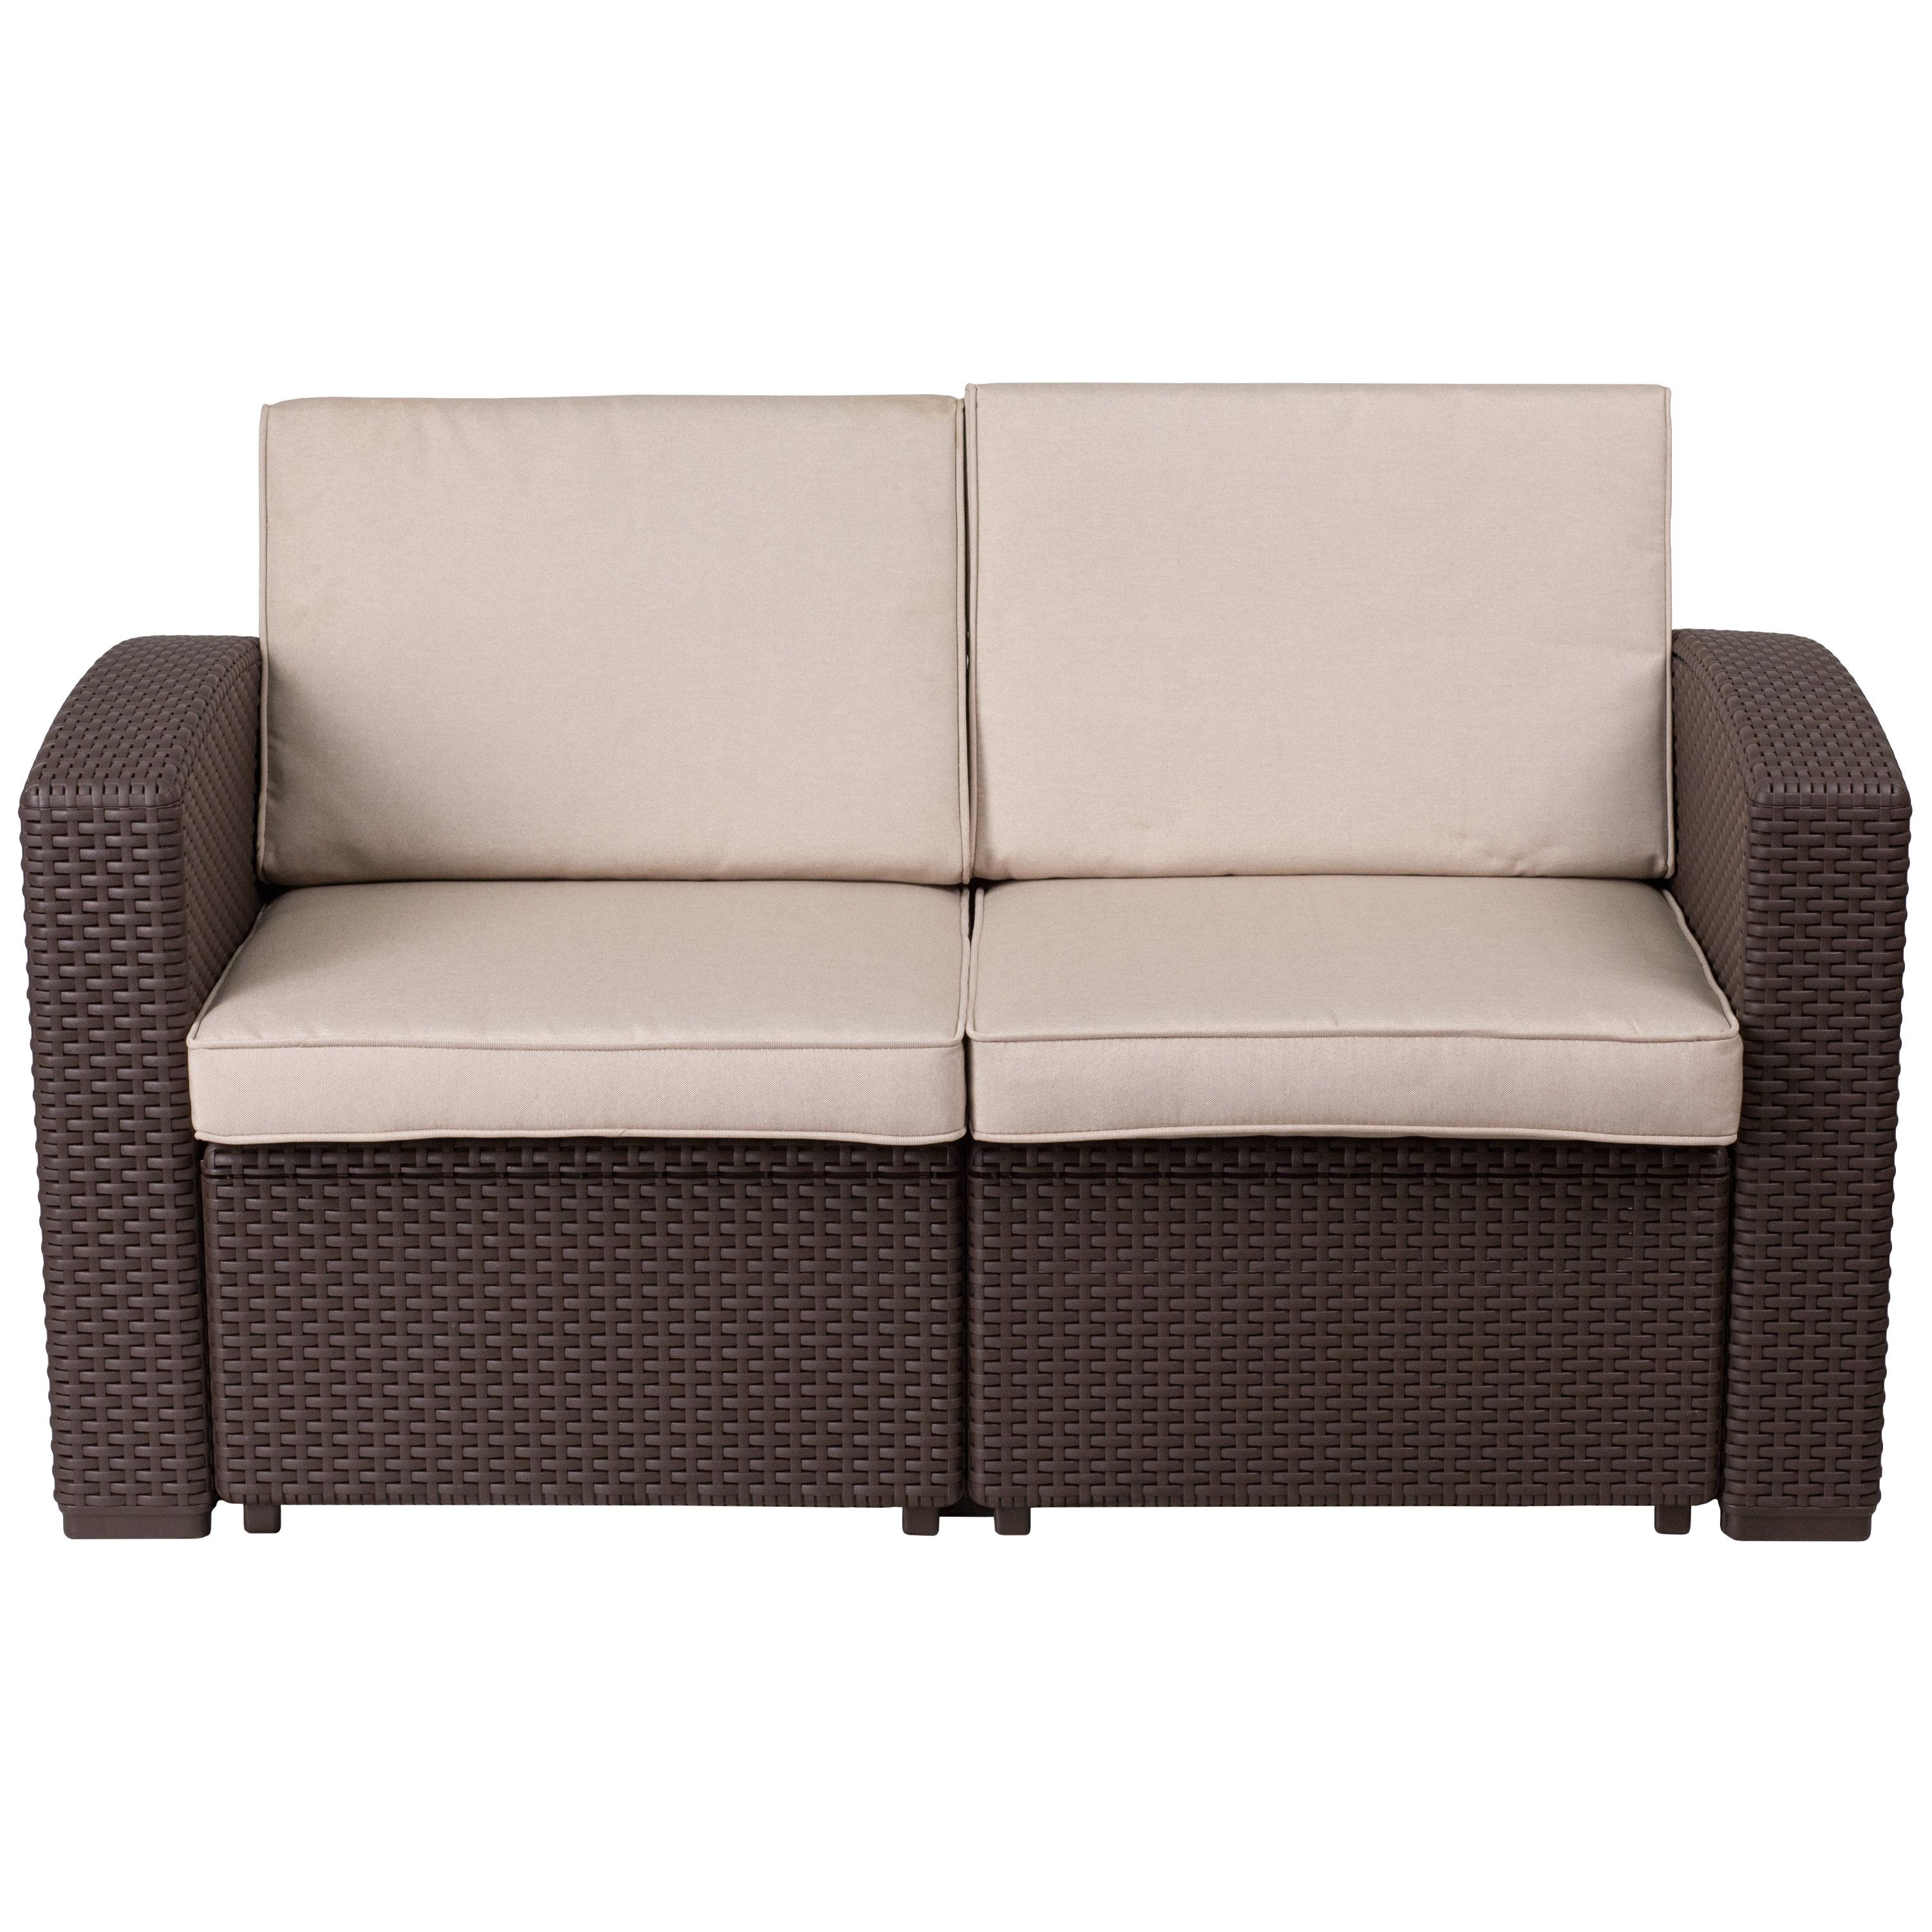 Most Popular Belton Loveseats With Cushions Pertaining To Clifford Loveseat With Cushion (View 5 of 25)